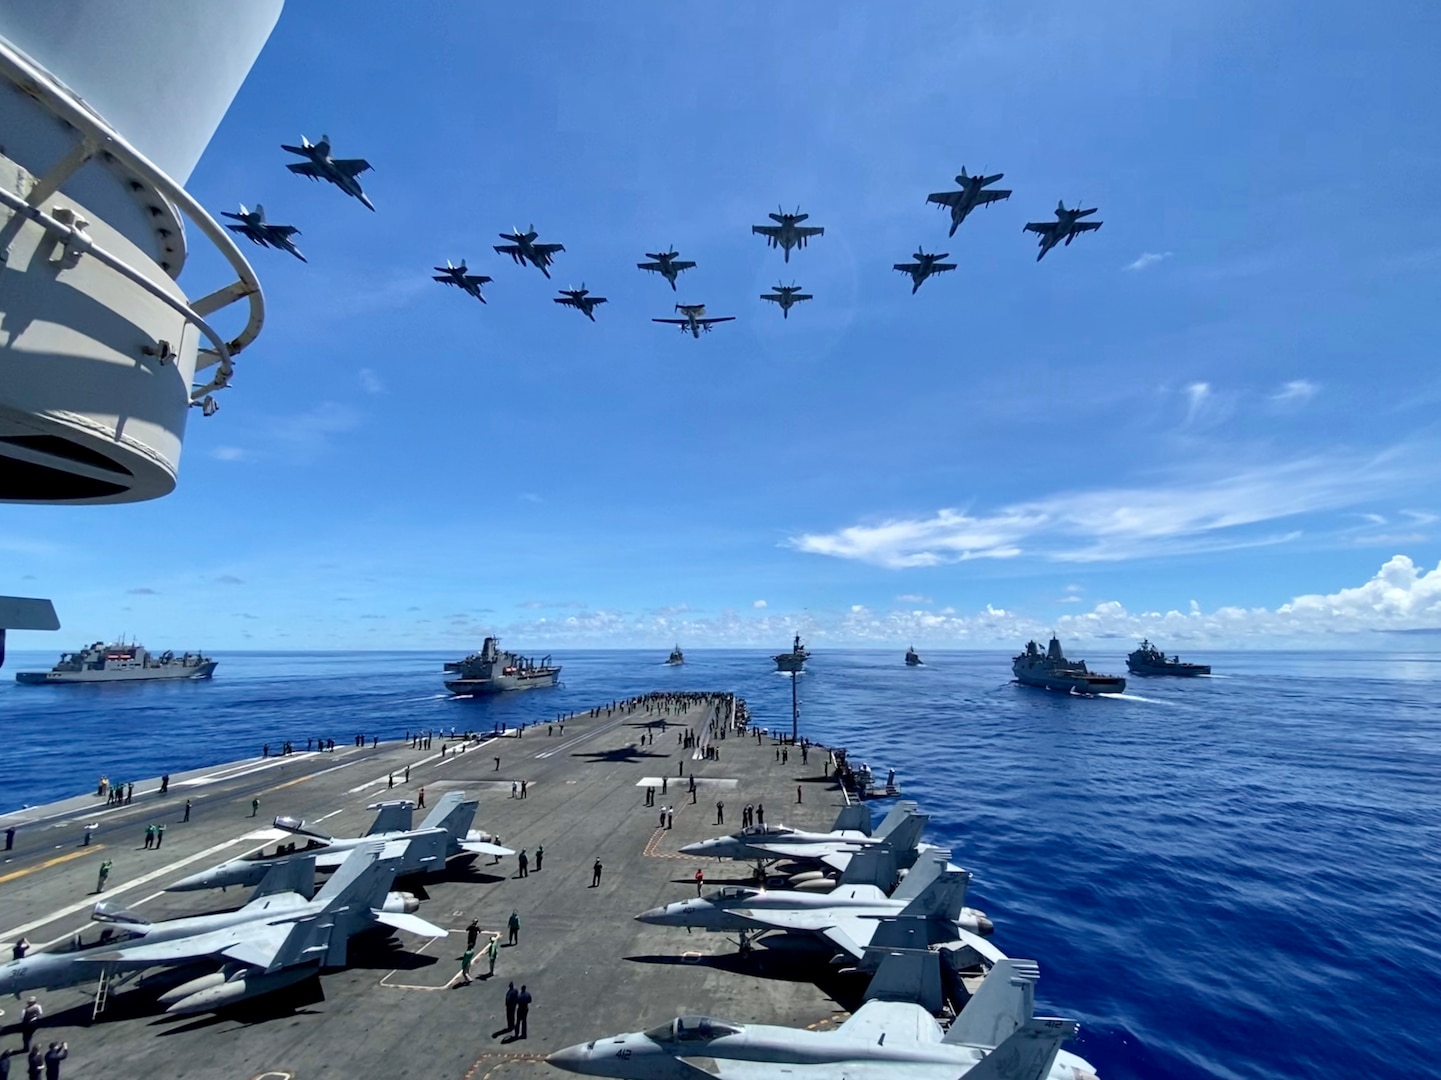 IMAGE: U.S. Navy warships steam in formation while E/A-18G Growlers, FA-18E Super Hornets and an E-2D Hawkeye from Carrier Air Wing (CVW) 5 fly over in support of Valiant Shield 2020. Naval Surface Warfare Center Dahlgren Division (NSWCDD) engineers designed and patented a new modeling and simulation tool known as “OSM” for Orchestrated Simulation through Modeling that is impacting technical programs, wargames and military exercises such as Valiant Shield. OSM is a new framework allowing scientists, warfighters, and college students to model ideas and develop wargaming scenarios seamlessly. The Modeling and Simulation Toolbox (MAST) architecture – built on the OSM framework – offers a human-in-the-loop wargaming capability that positively impacted and adjudicated live events and military exercises – including Valiant Shield and Northern Edge. “The opportunities and possibilities for analysis using OSM and MAST are unlimited,” said Mike Maldonado, NSWCDD Modeling and Simulation Branch deputy program manager. “The framework is built for speed and provides anyone with the capability to model and test an idea quickly – in minutes – to see if it’s going in the right direction.” Pictured from left: USNS Sacagawea (T-AKE 2), USS Germantown (LSD 42), USNS John Ericsson (T-AO 194), USS Antietam (CG 54), USS Ronald Reagan (CVN 76), USS America (LHA 6), USS Shiloh (CG 67), USS New Orleans (LPD 18), and USS Comstock (LSD 45).